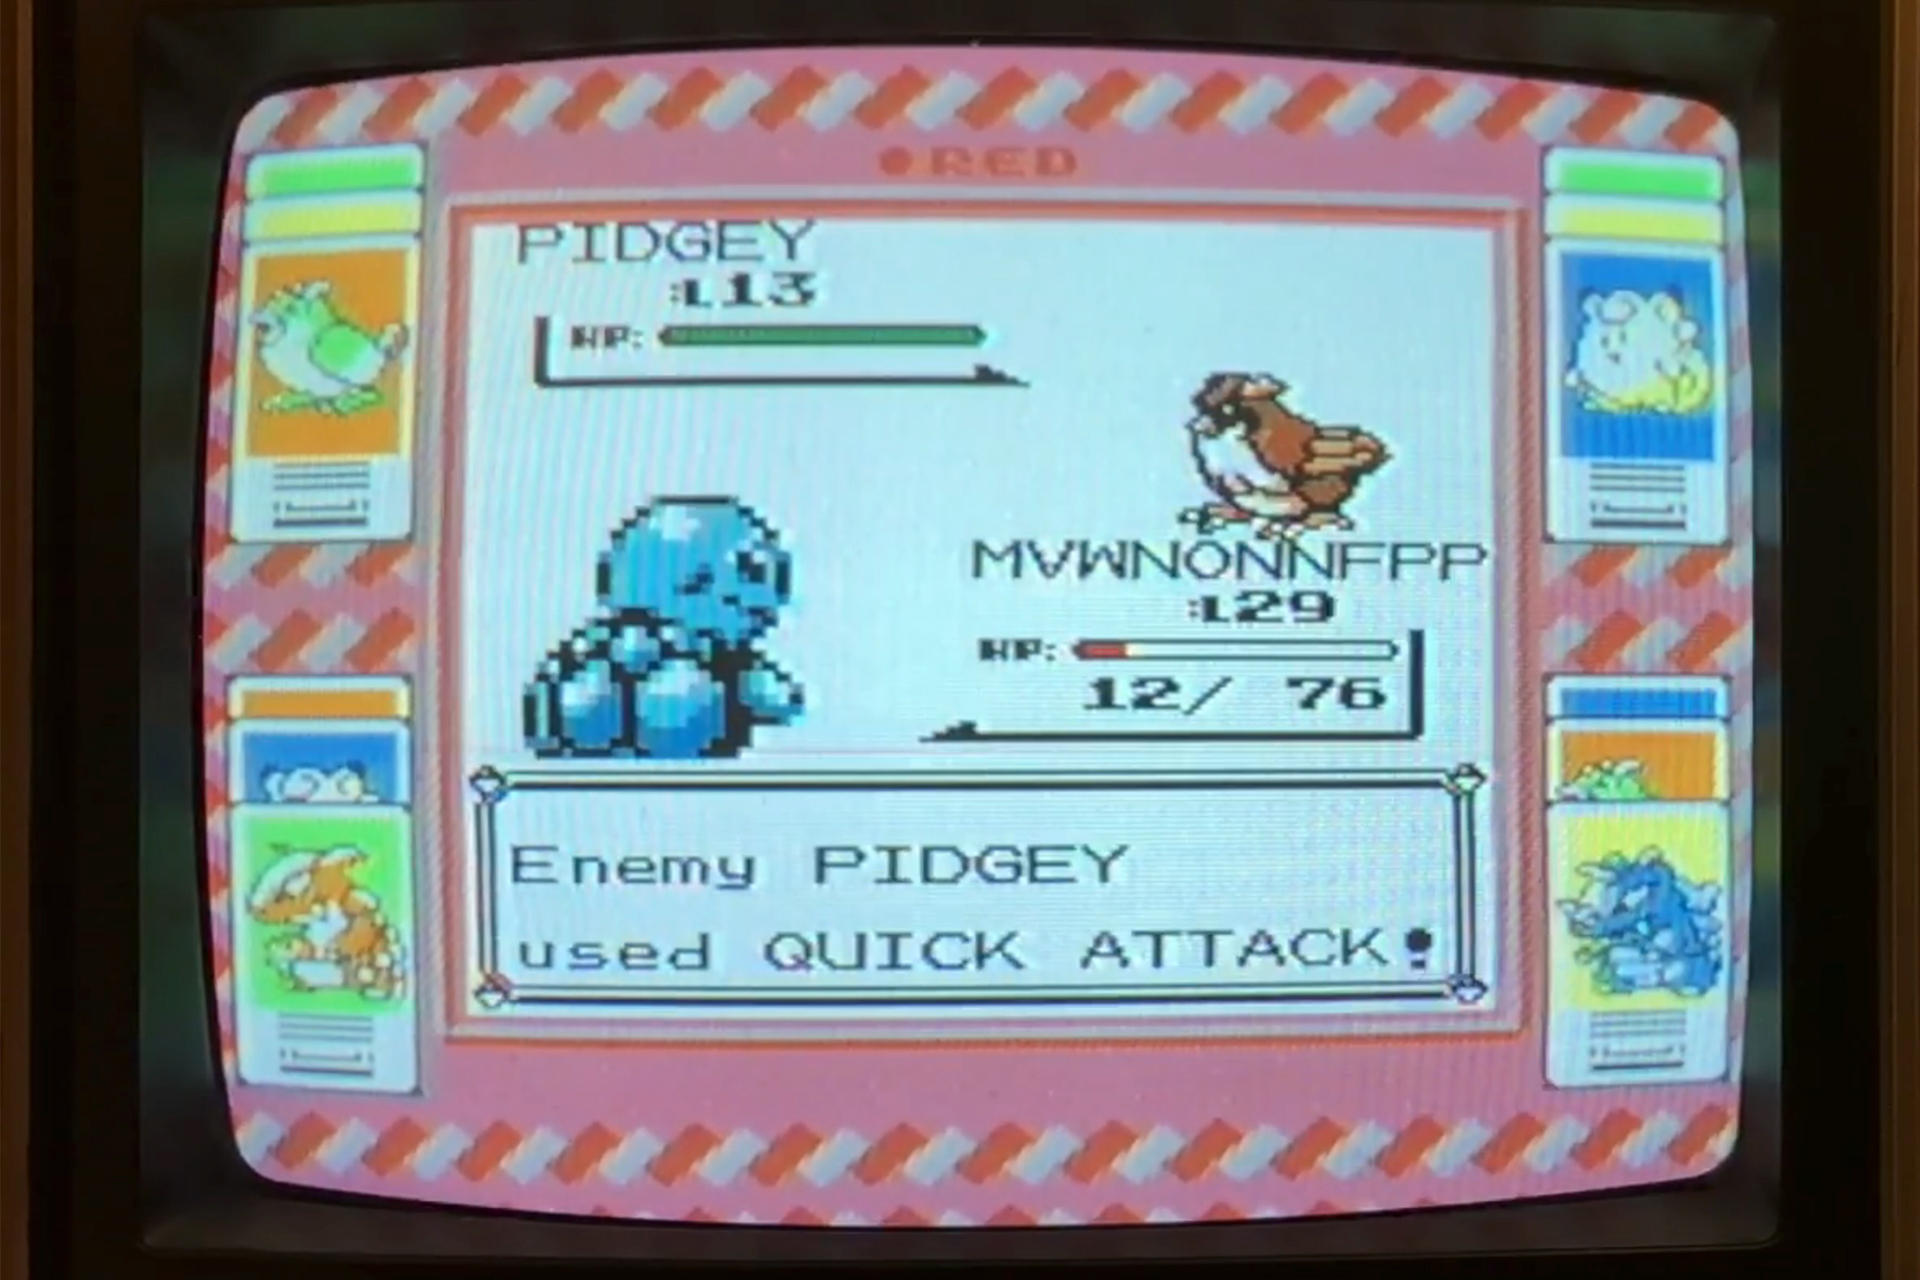 A screenshot of a Squirtle battling a Pidgey in Pokémon Red, running on a Super Game Boy and displayed on a CRT television screen